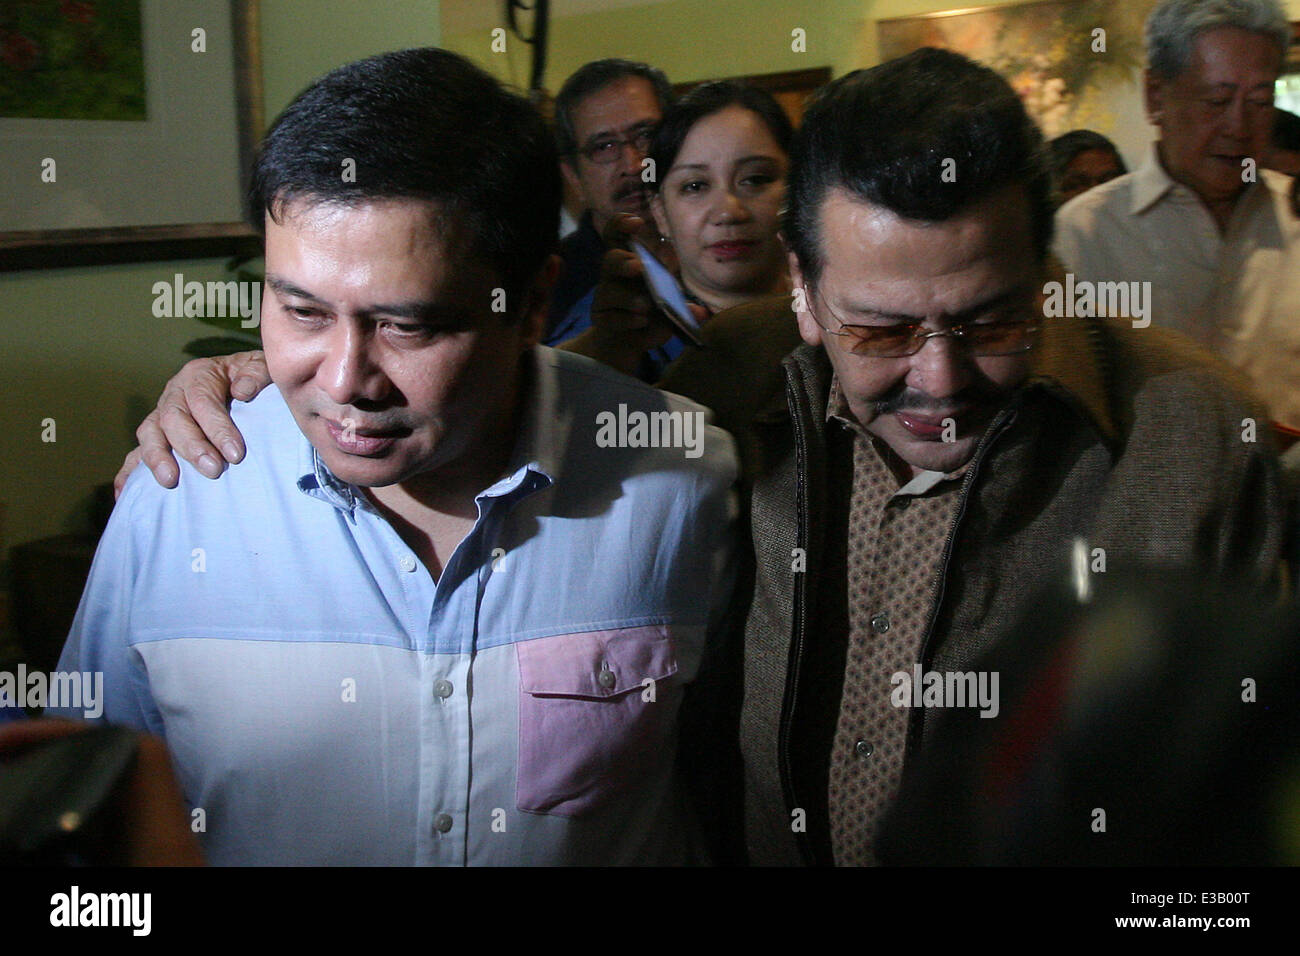 (140623) -- SAN JUAN CITY, June 23, 2014 (Xinhua) -- Philippine Senator Jinggoy Estrada (L) walks with his father, former President and current Mayor of Manila Joseph Estrada (R), at their home in San Juan City, the Philippines, June 23, 2014. Jinggoy Estrada surrendered to the Philippine anti-graft court to face plunder charges for the misuse of government funds. (Xinhua/Rouelle Umali) Stock Photo